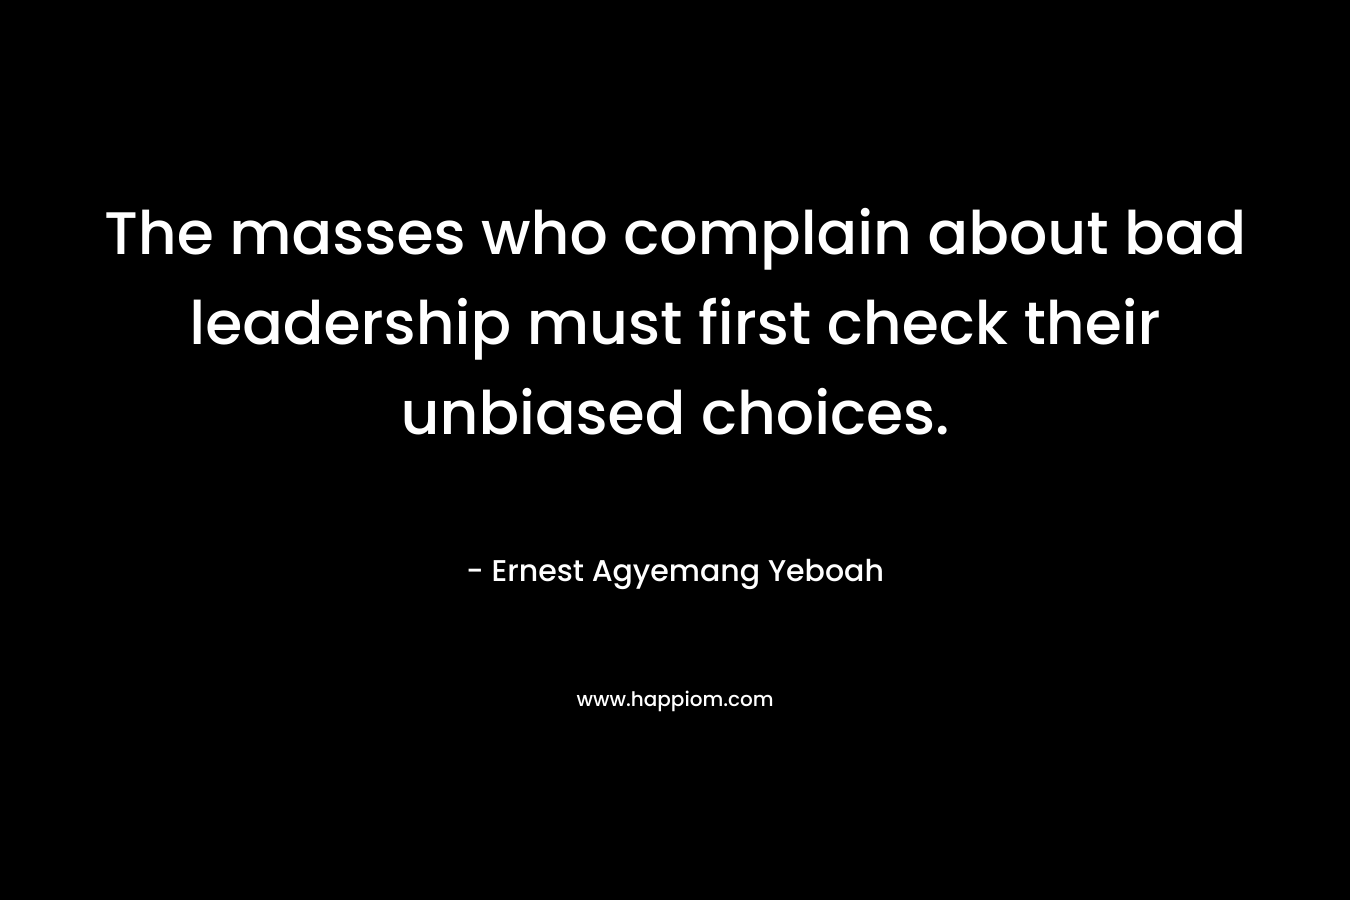 The masses who complain about bad leadership must first check their unbiased choices.